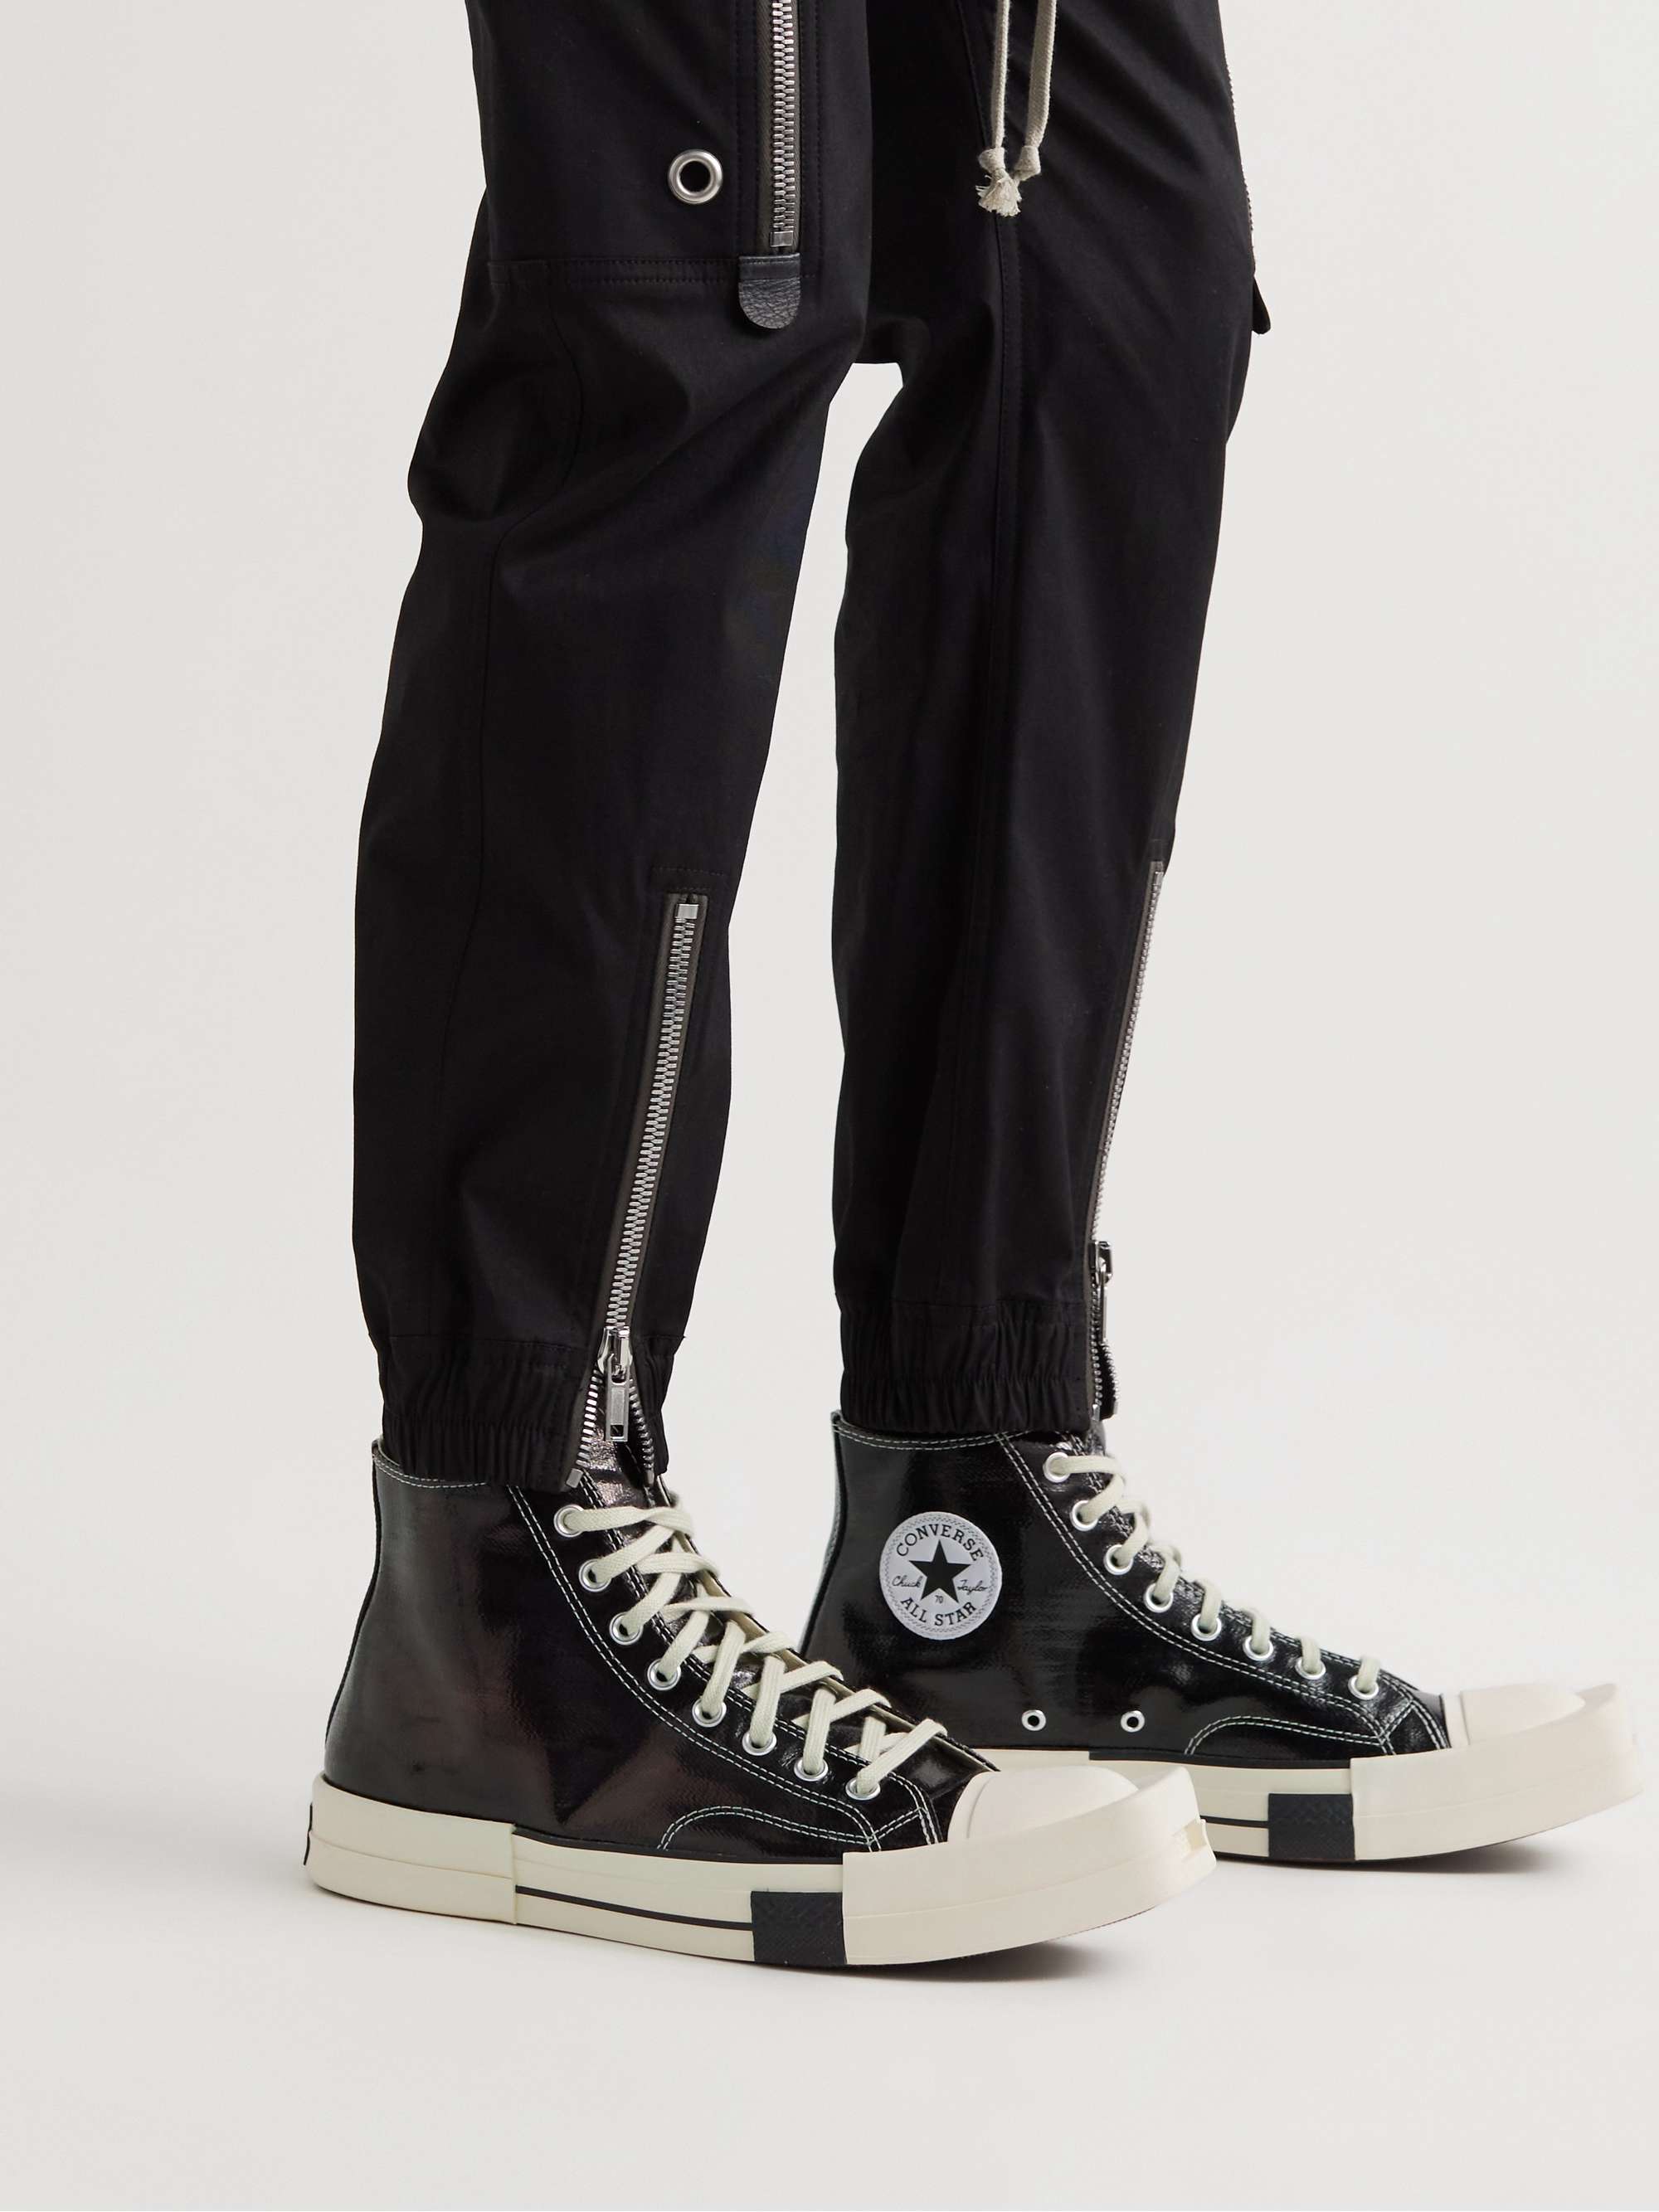 RICK OWENS + Converse TURBODRK Chuck 70 Coated-Canvas High-Top Sneakers